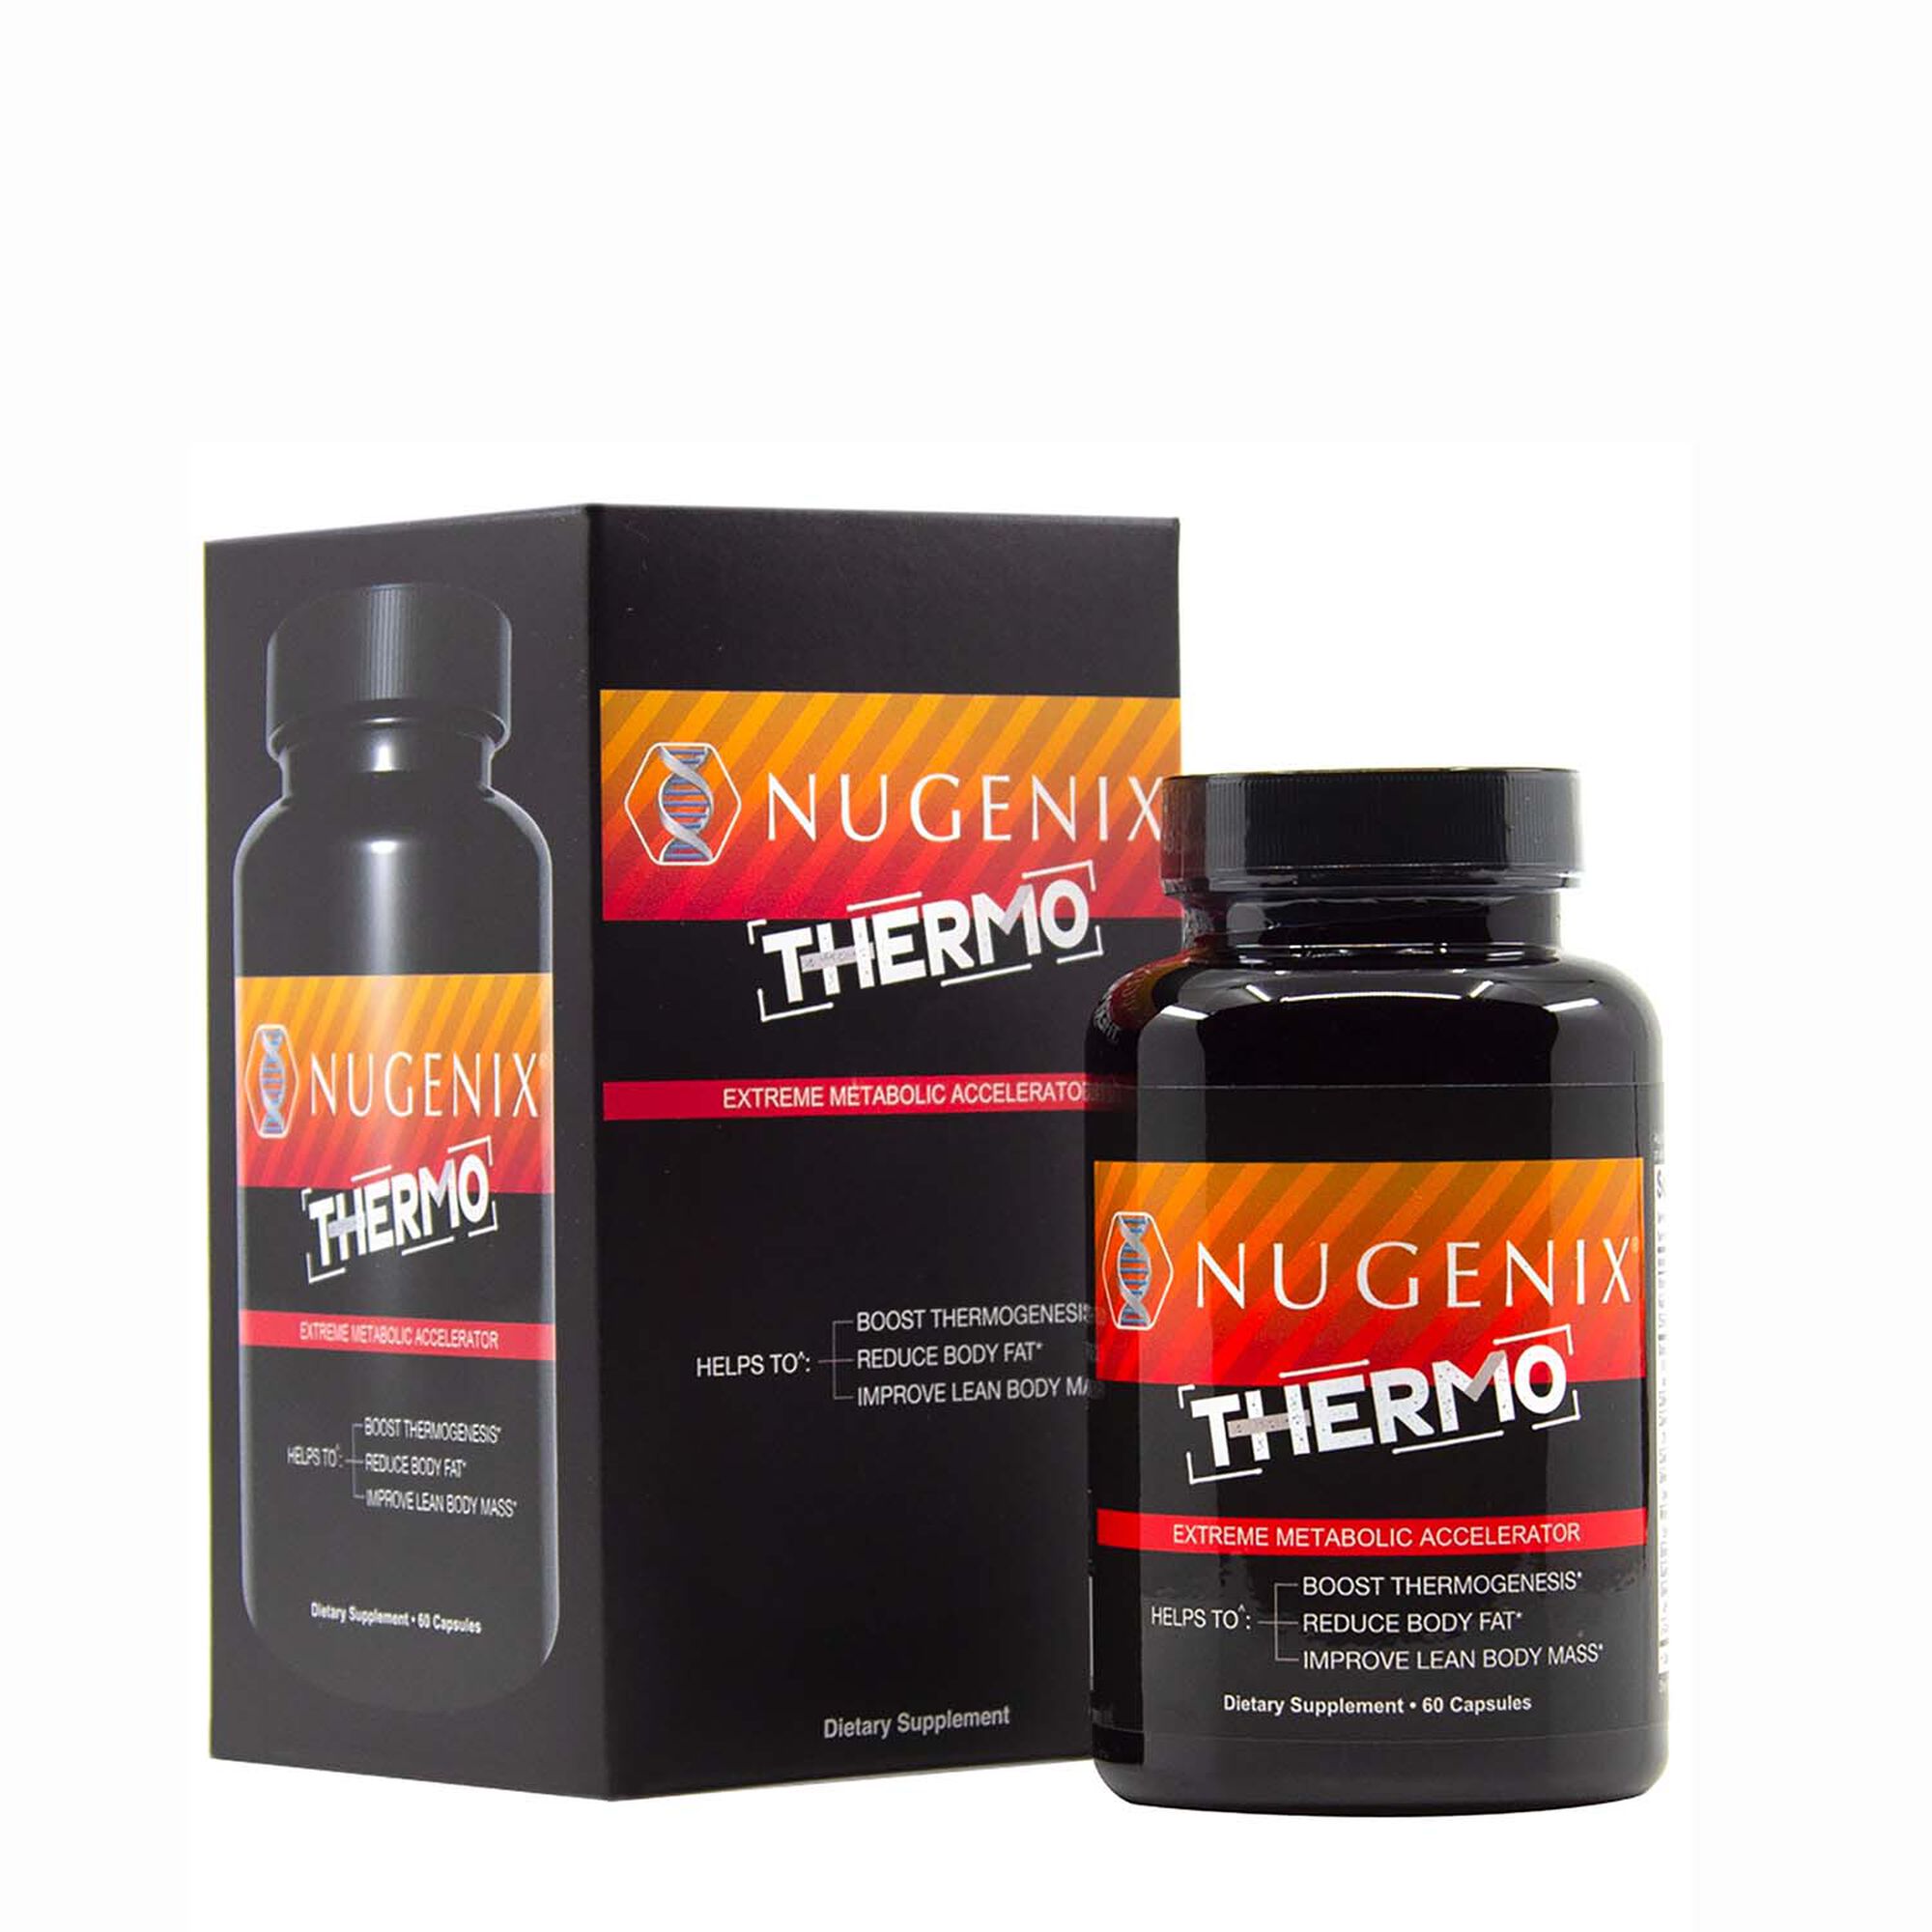 Nugenix Thermo Bottle and Box